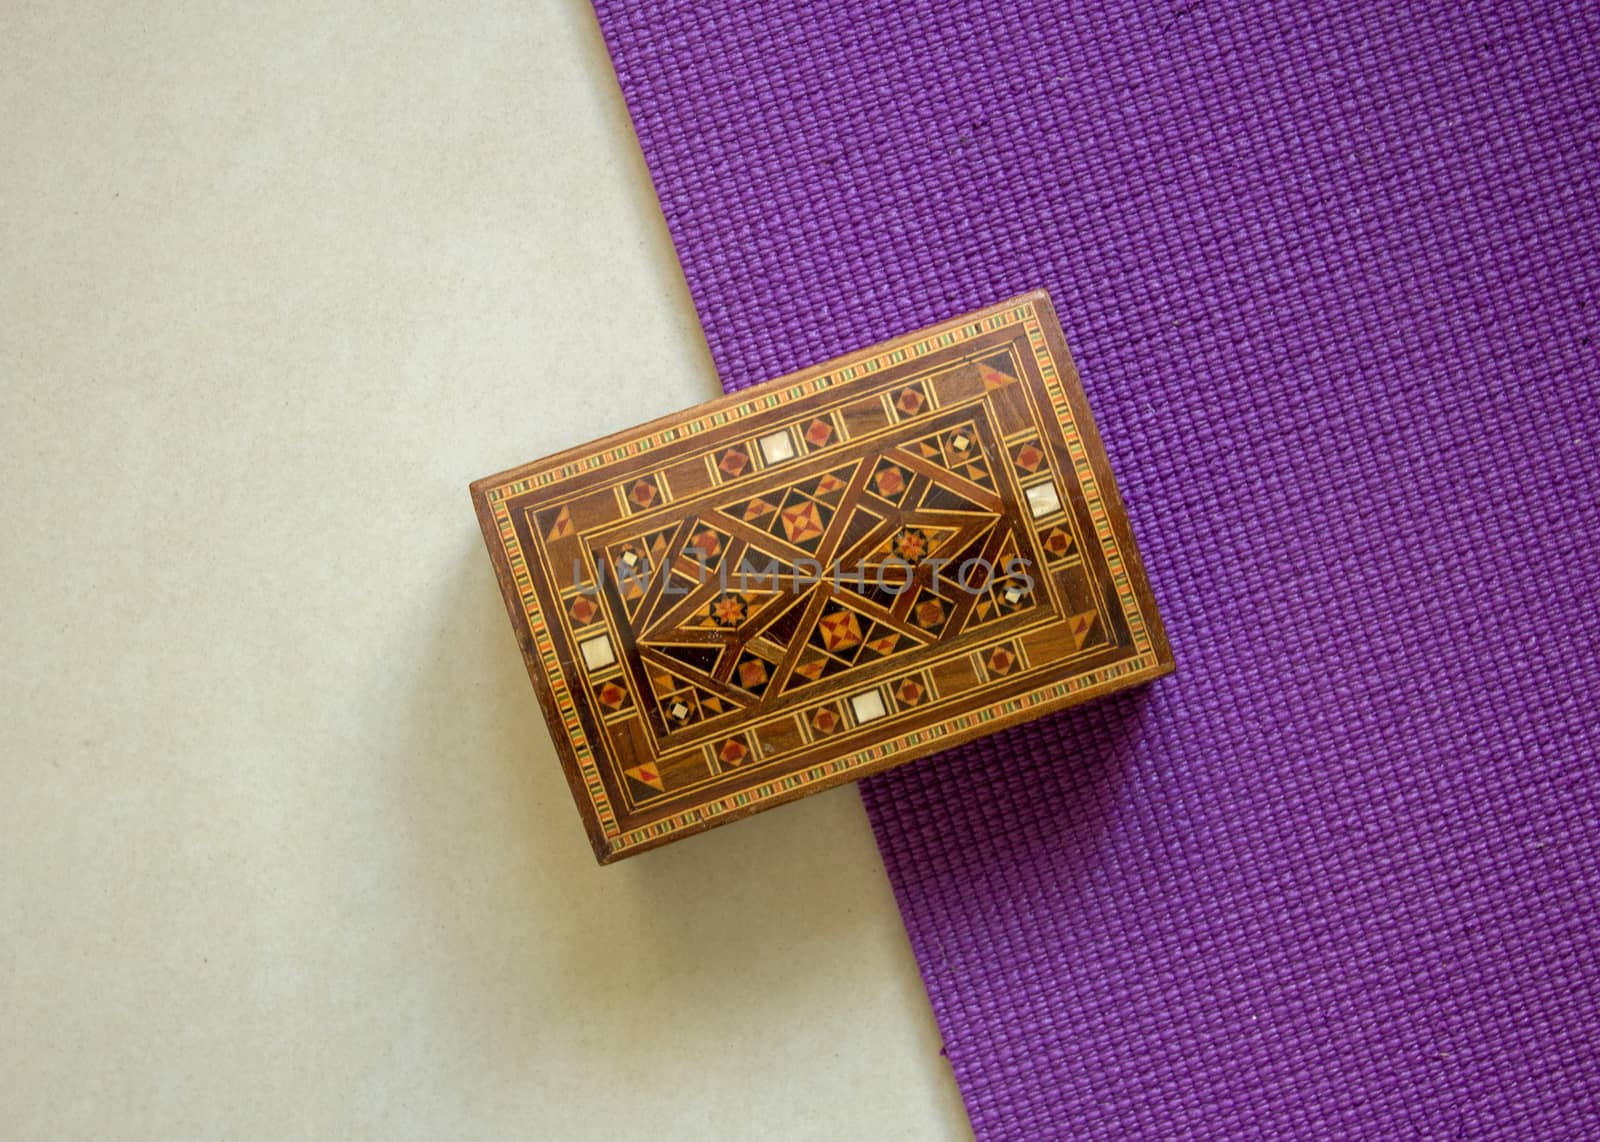 Top view of a wooden box very well ornamented with small bamboo pieces, with a white and purple background